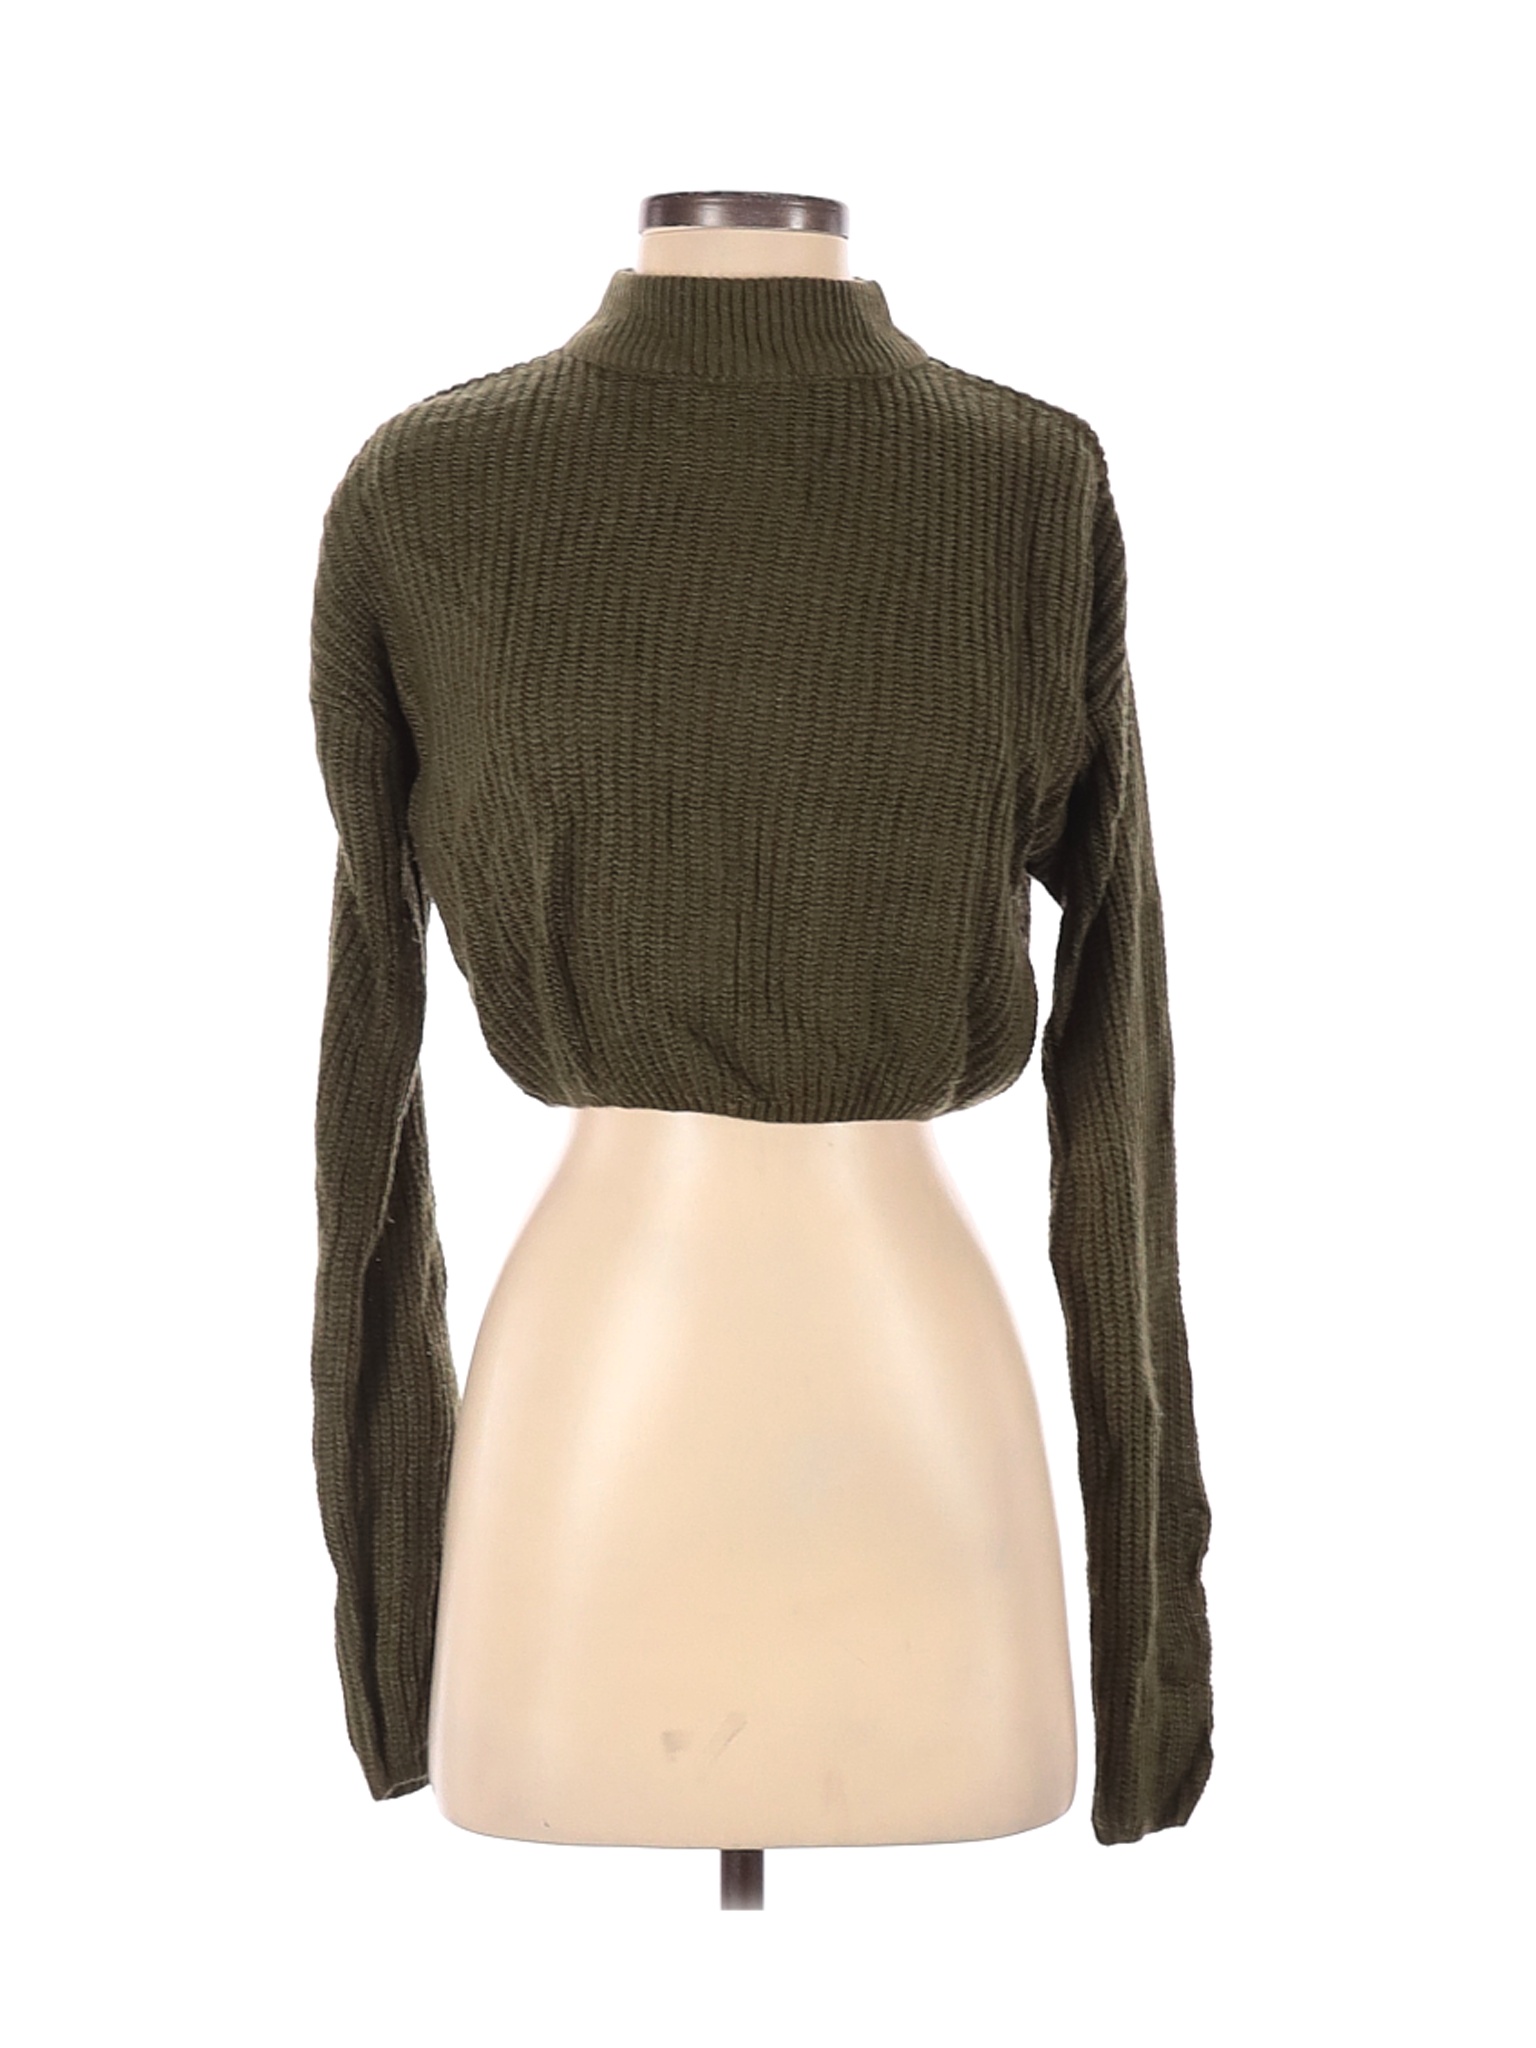 Divided by H&M Women Green Pullover Sweater XS | eBay